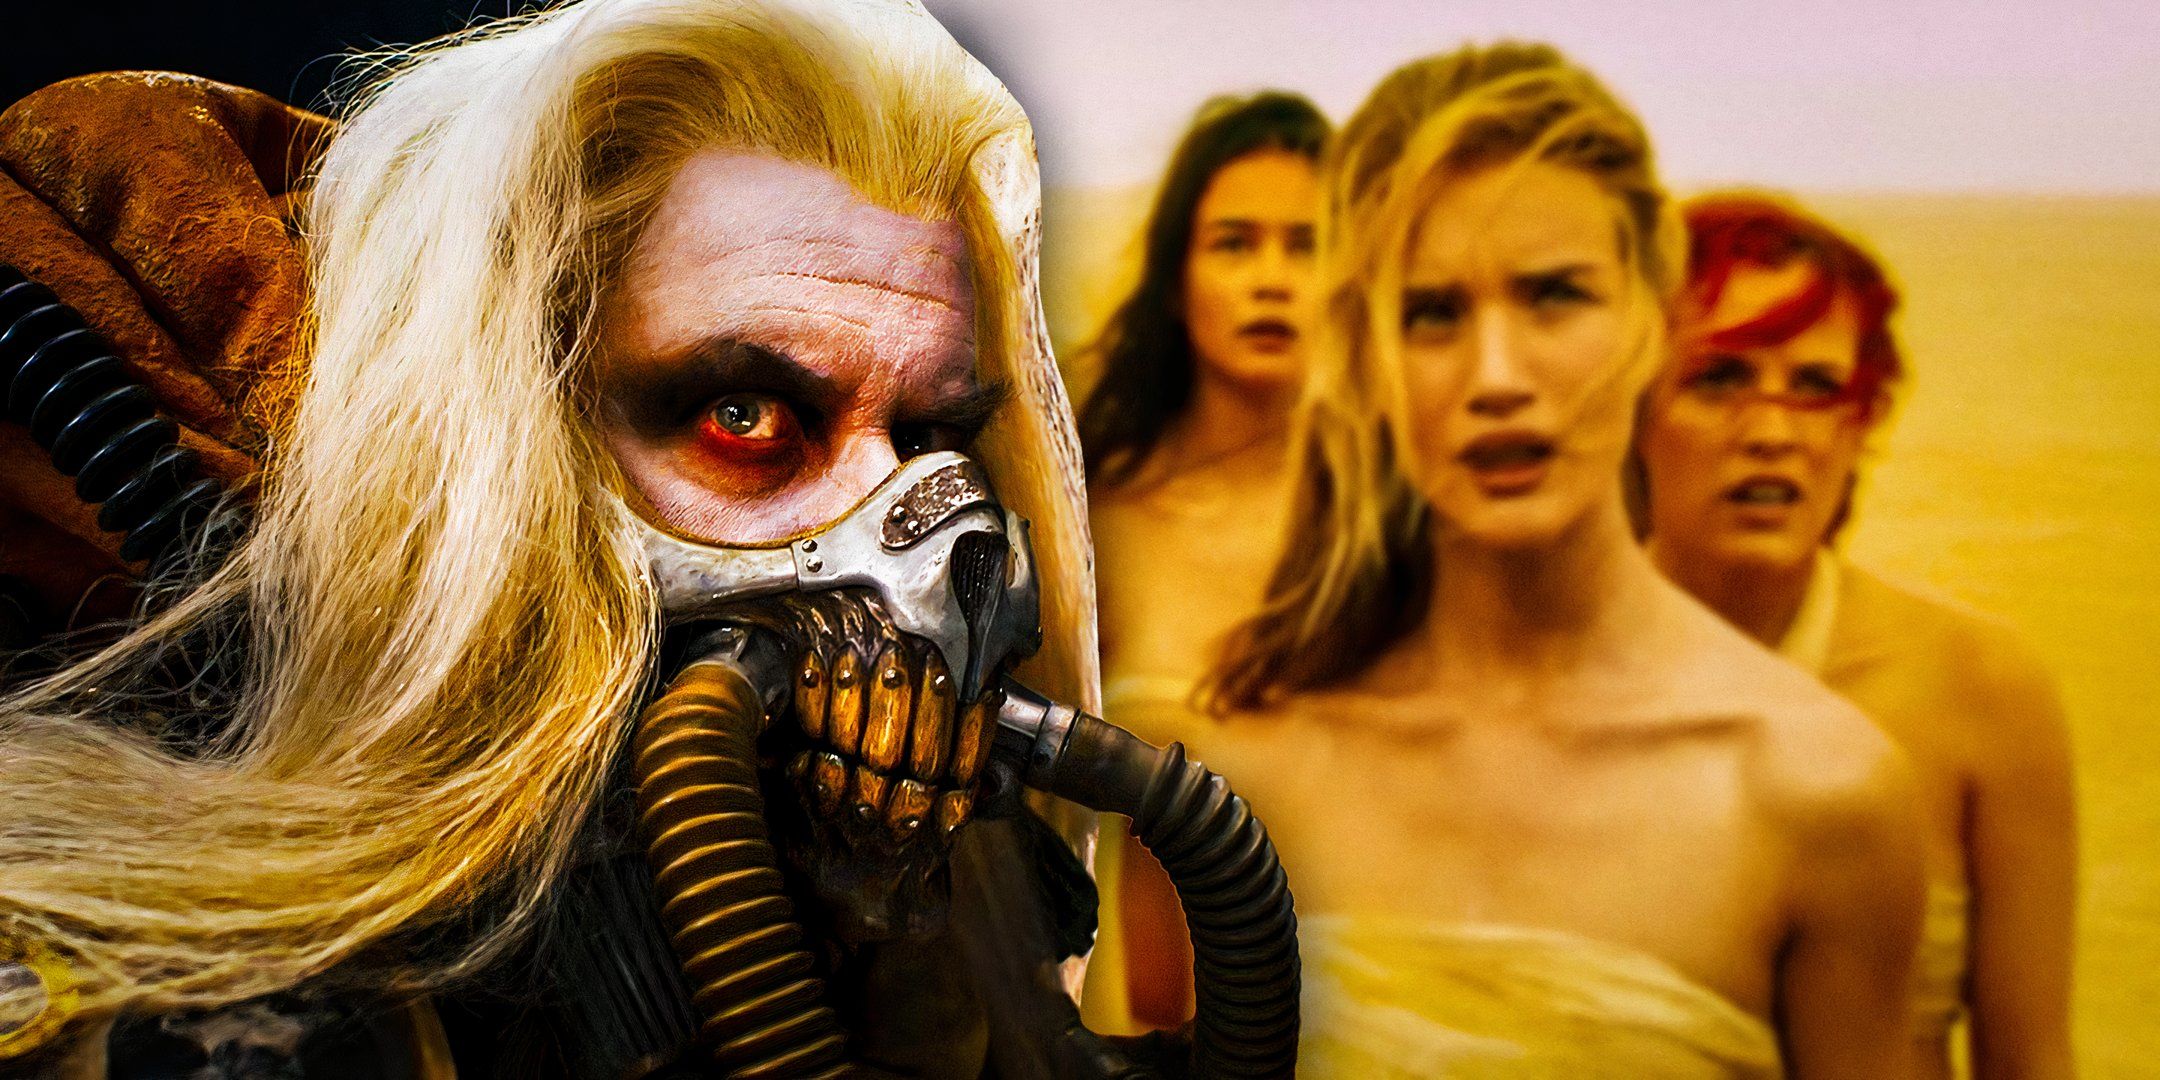 Immortan Joe (Hugh Keays-Byrne) and Angharad (Rosie Huntington-Whiteley), Capable (Riley Keough) and Cheedo the Fragile (Courtney Eaton) in Mad Max: Fury Road